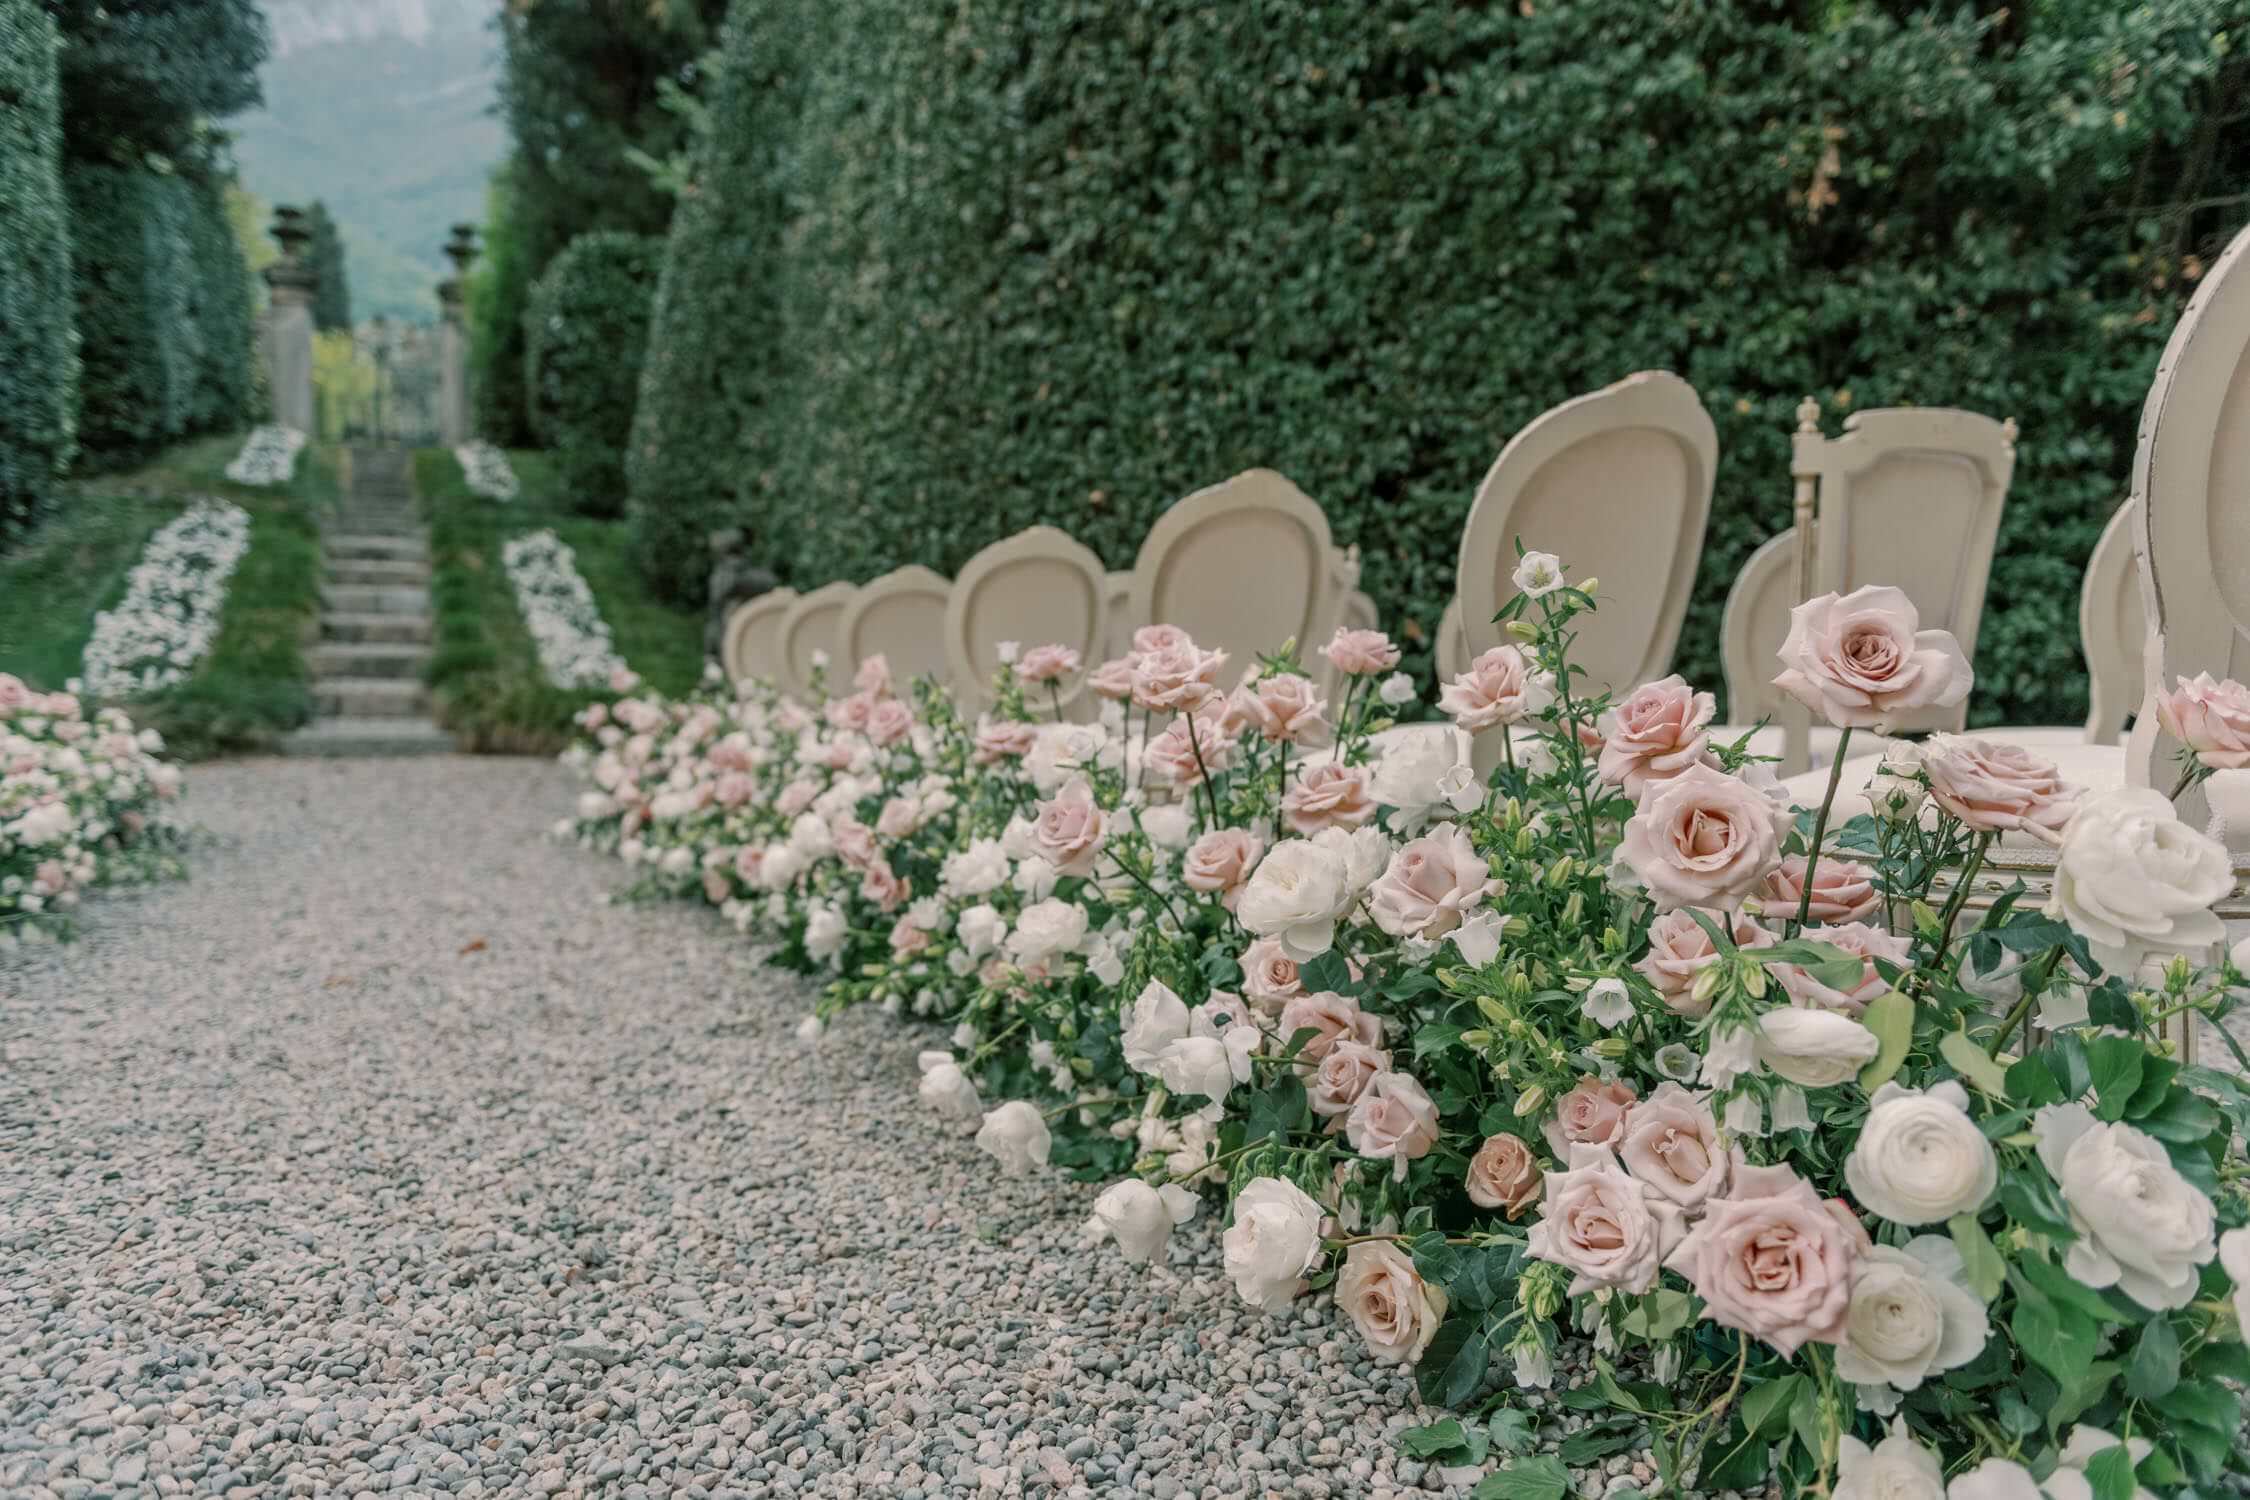 Abundant flowers in a ceremony setting at Lake Como